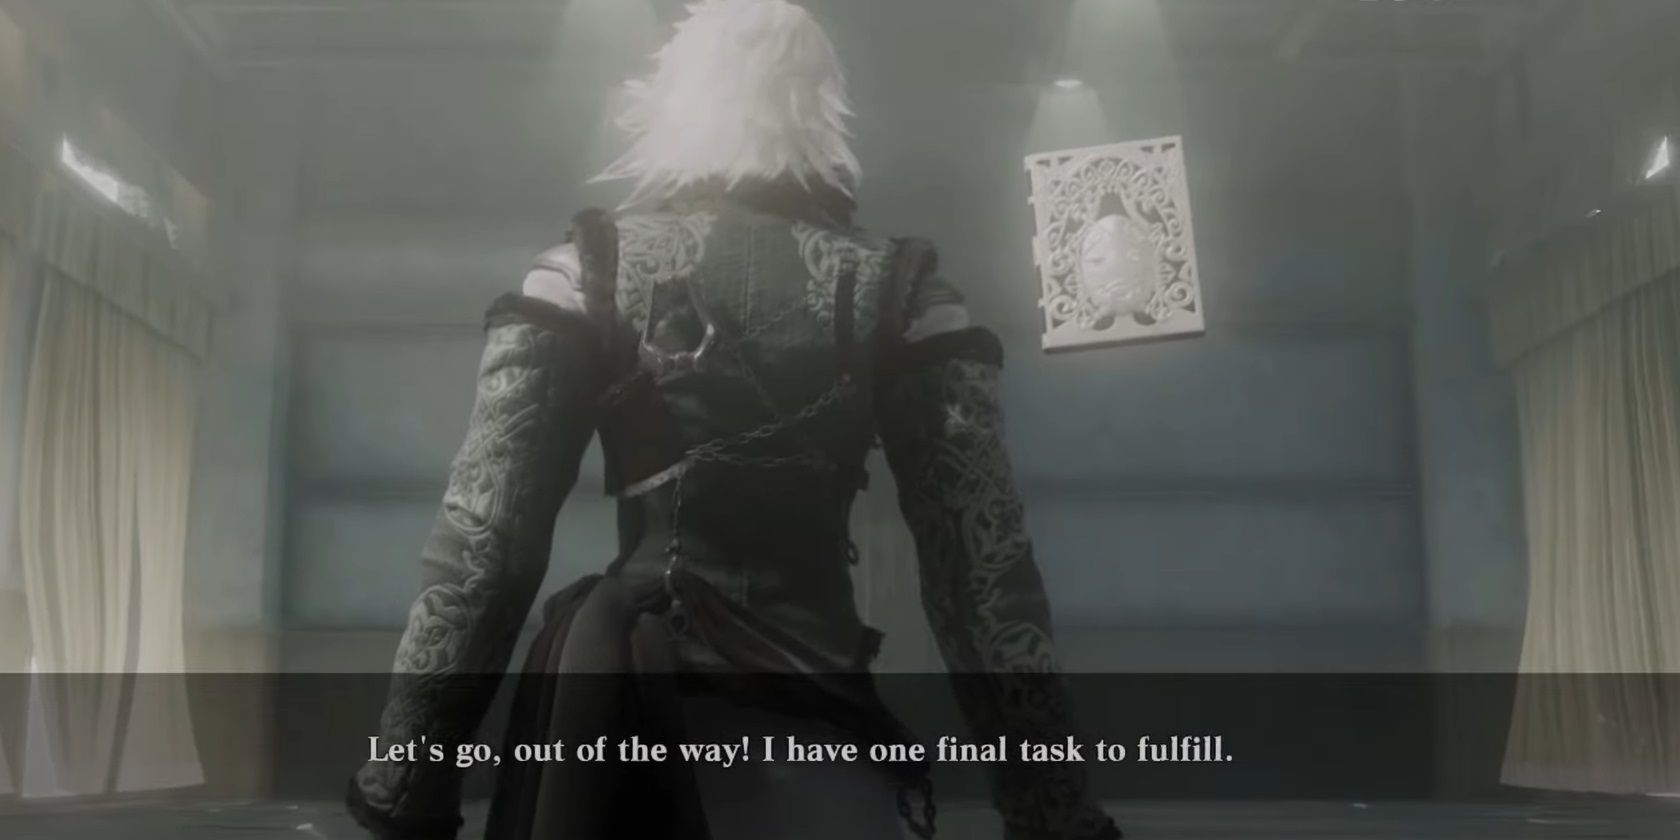 Nier Replicant - Grimoire Weiss gets ready for his sacrifice